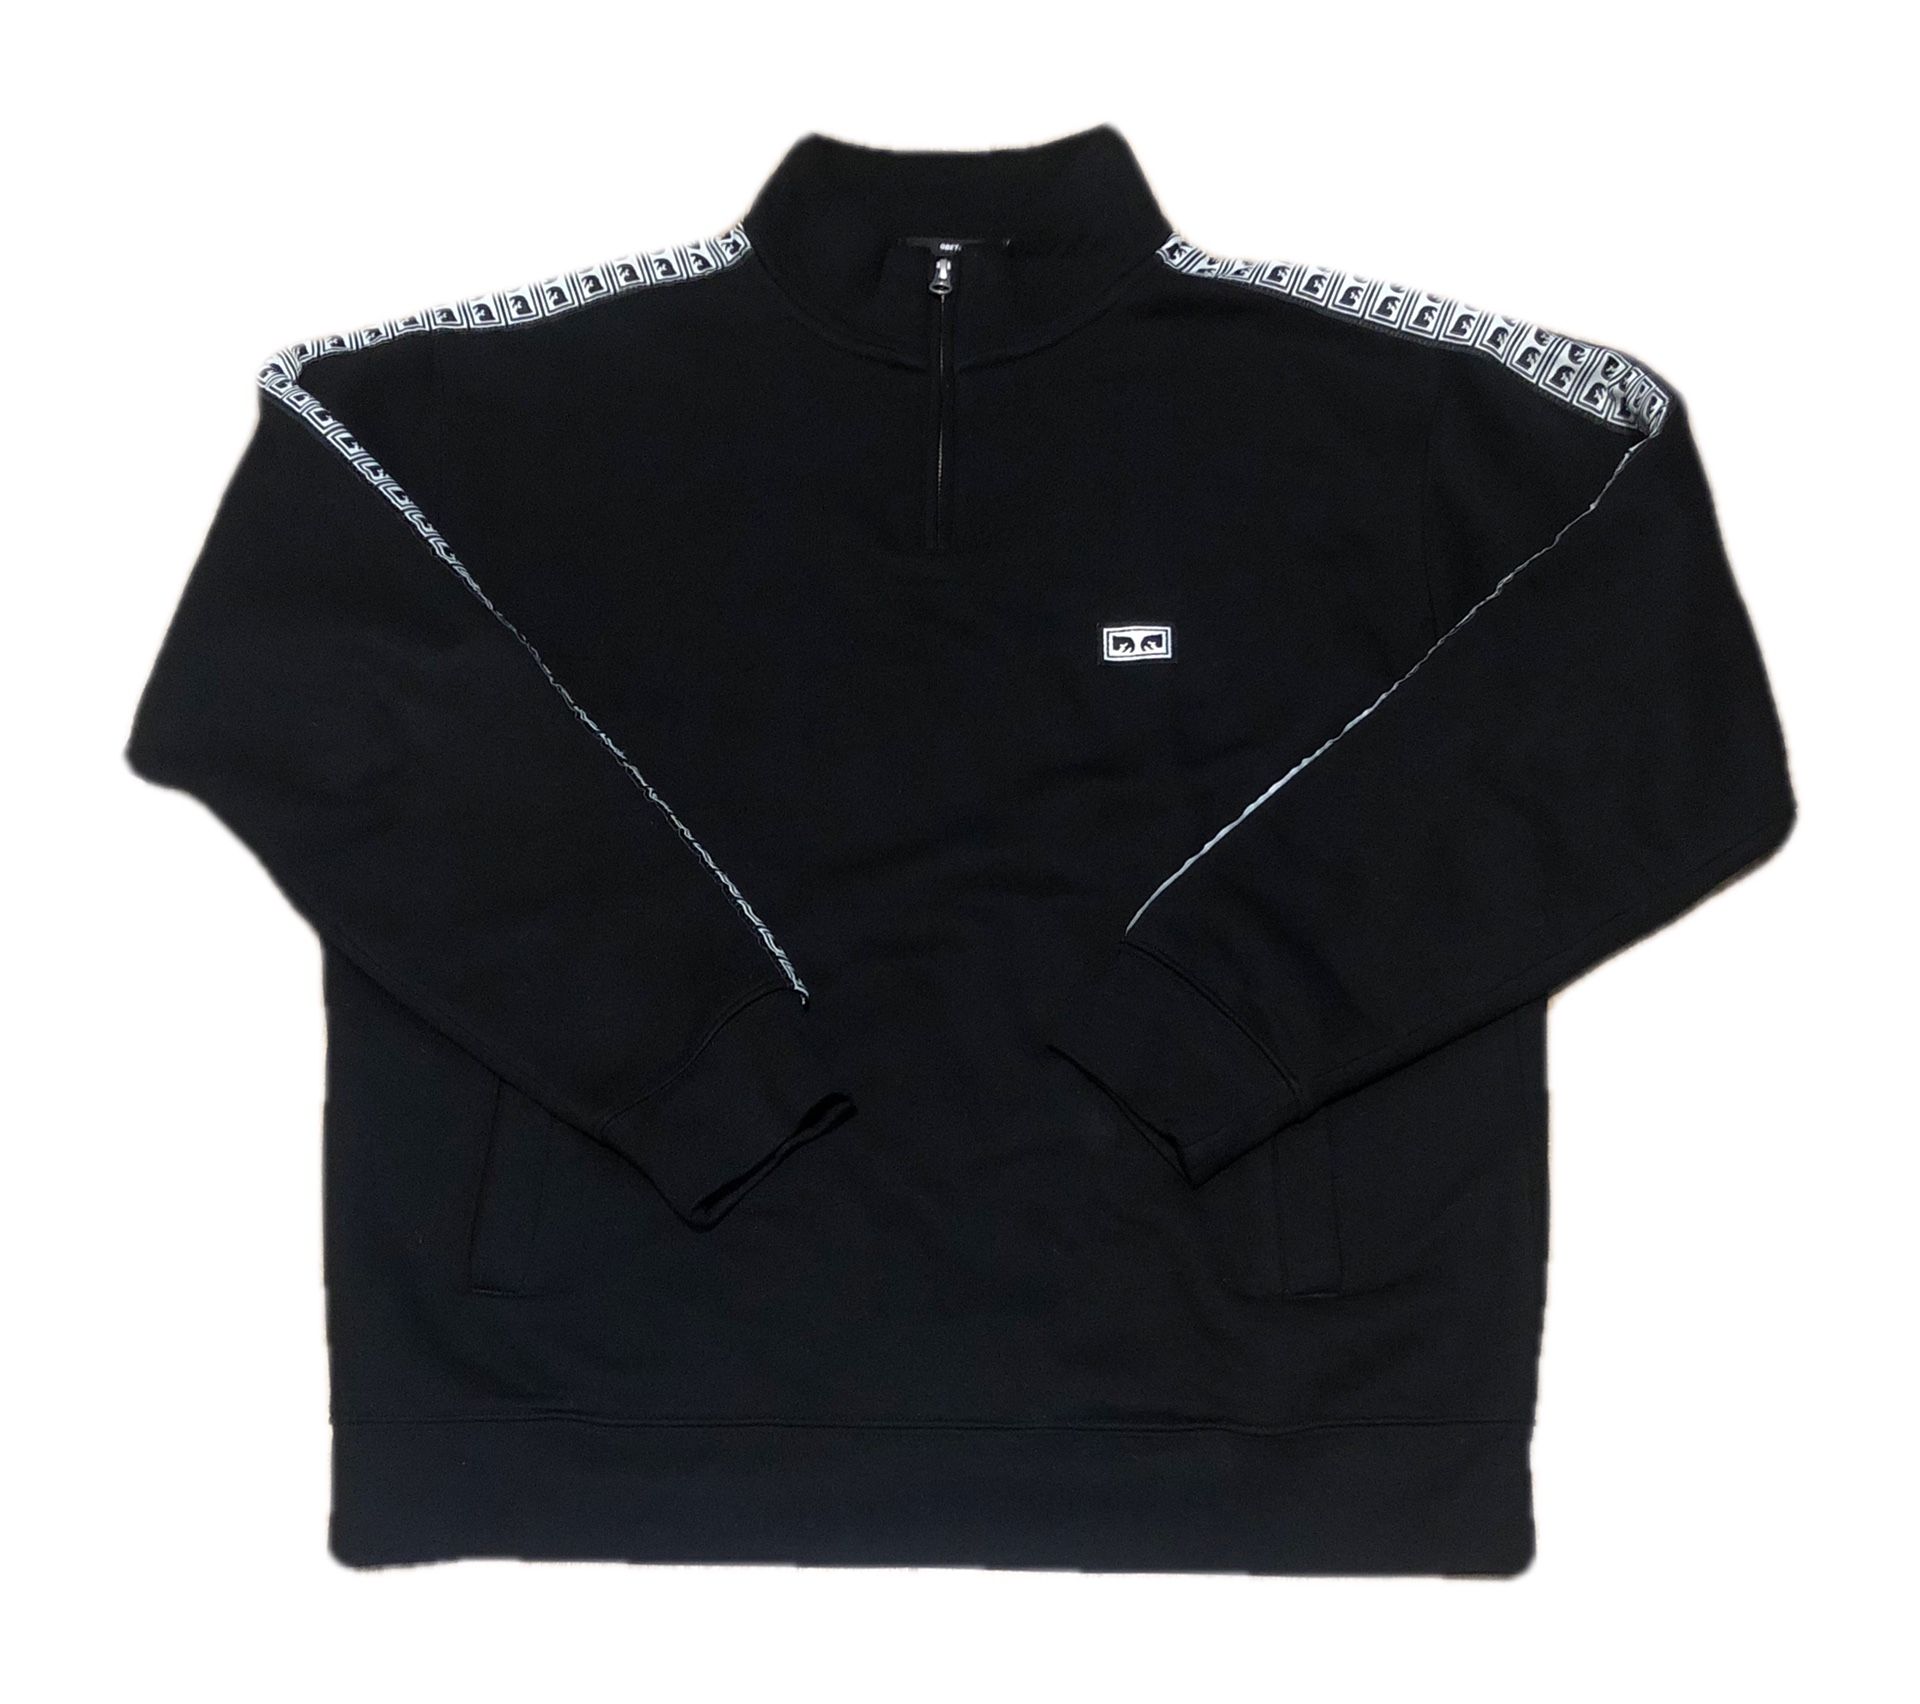 Obey 1/4 zip up sweater